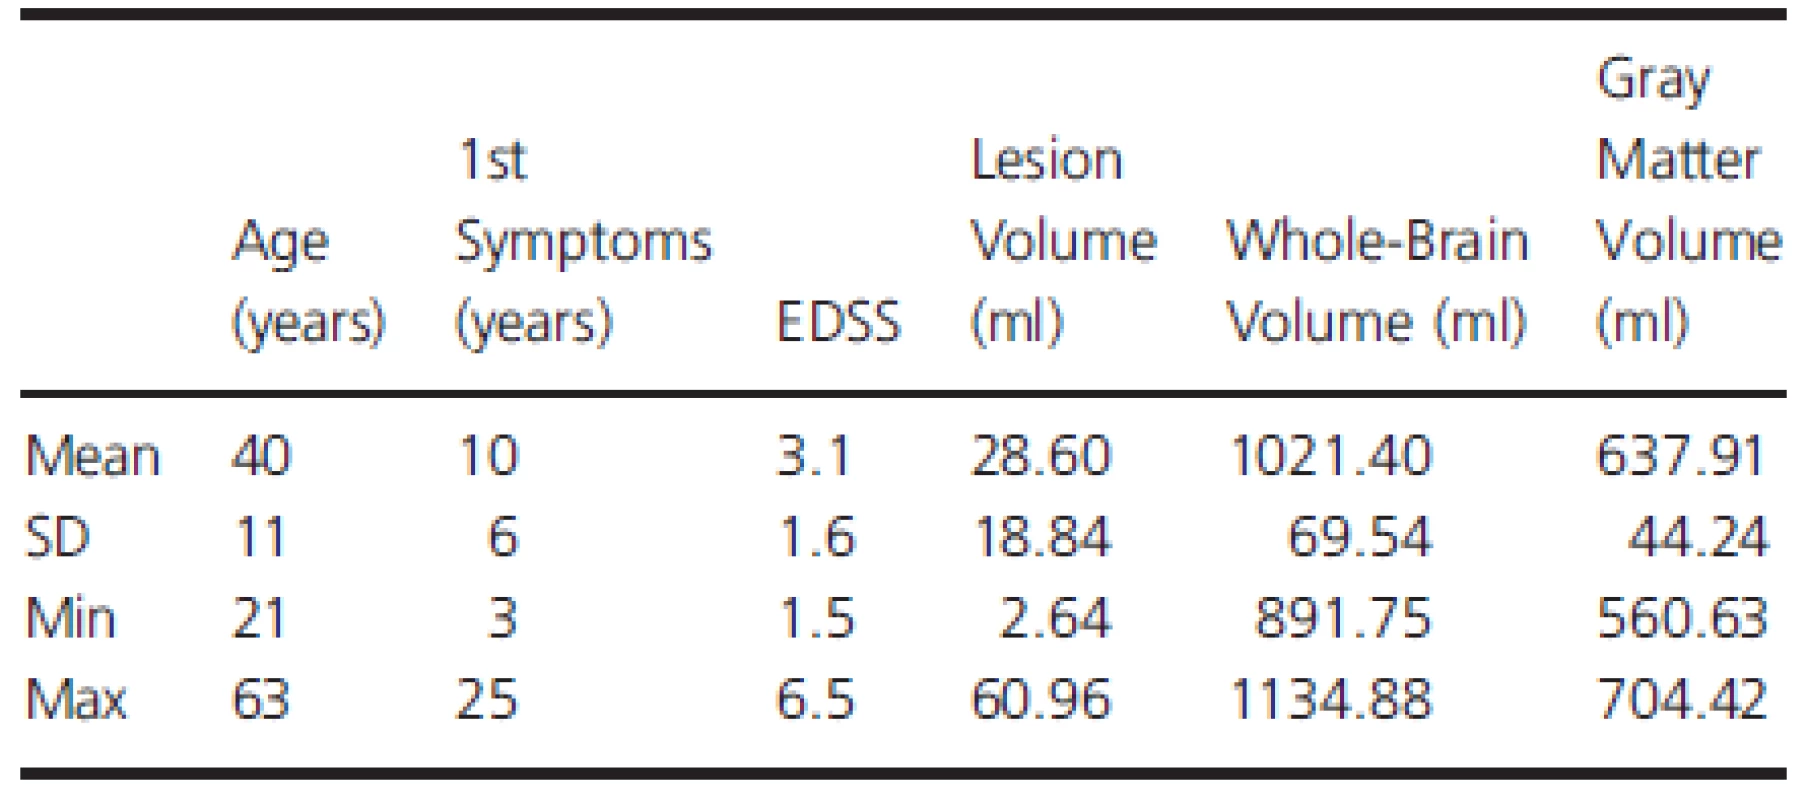 Population overview with mean value, standard deviation and minimum and maximal values for age, disease duration since 1st symptoms, EDSS, brain volume, and lesion volume.